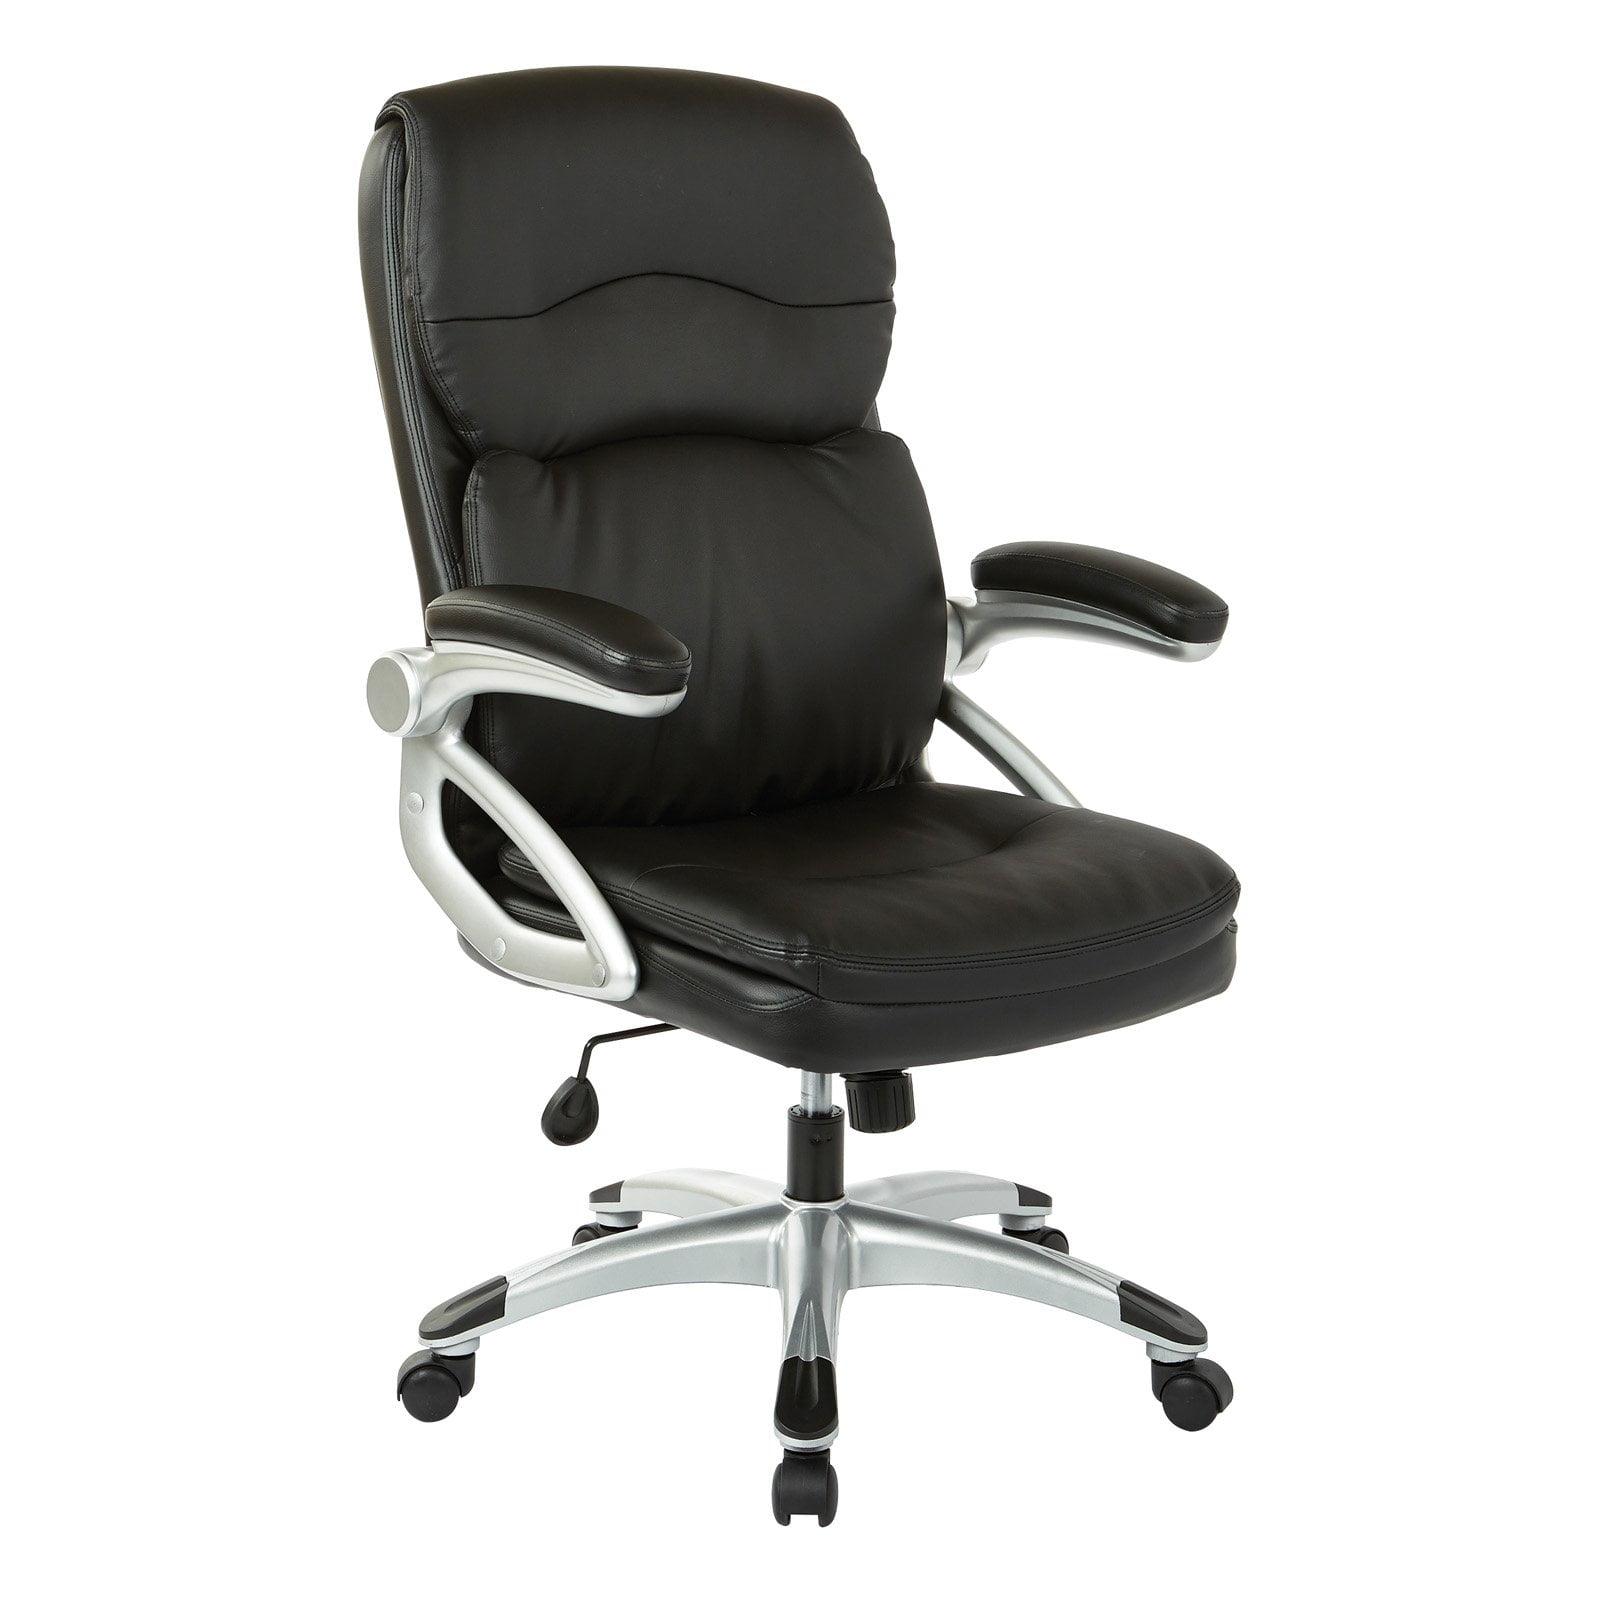 High Back Black Leather Executive Chair with Adjustable Arms